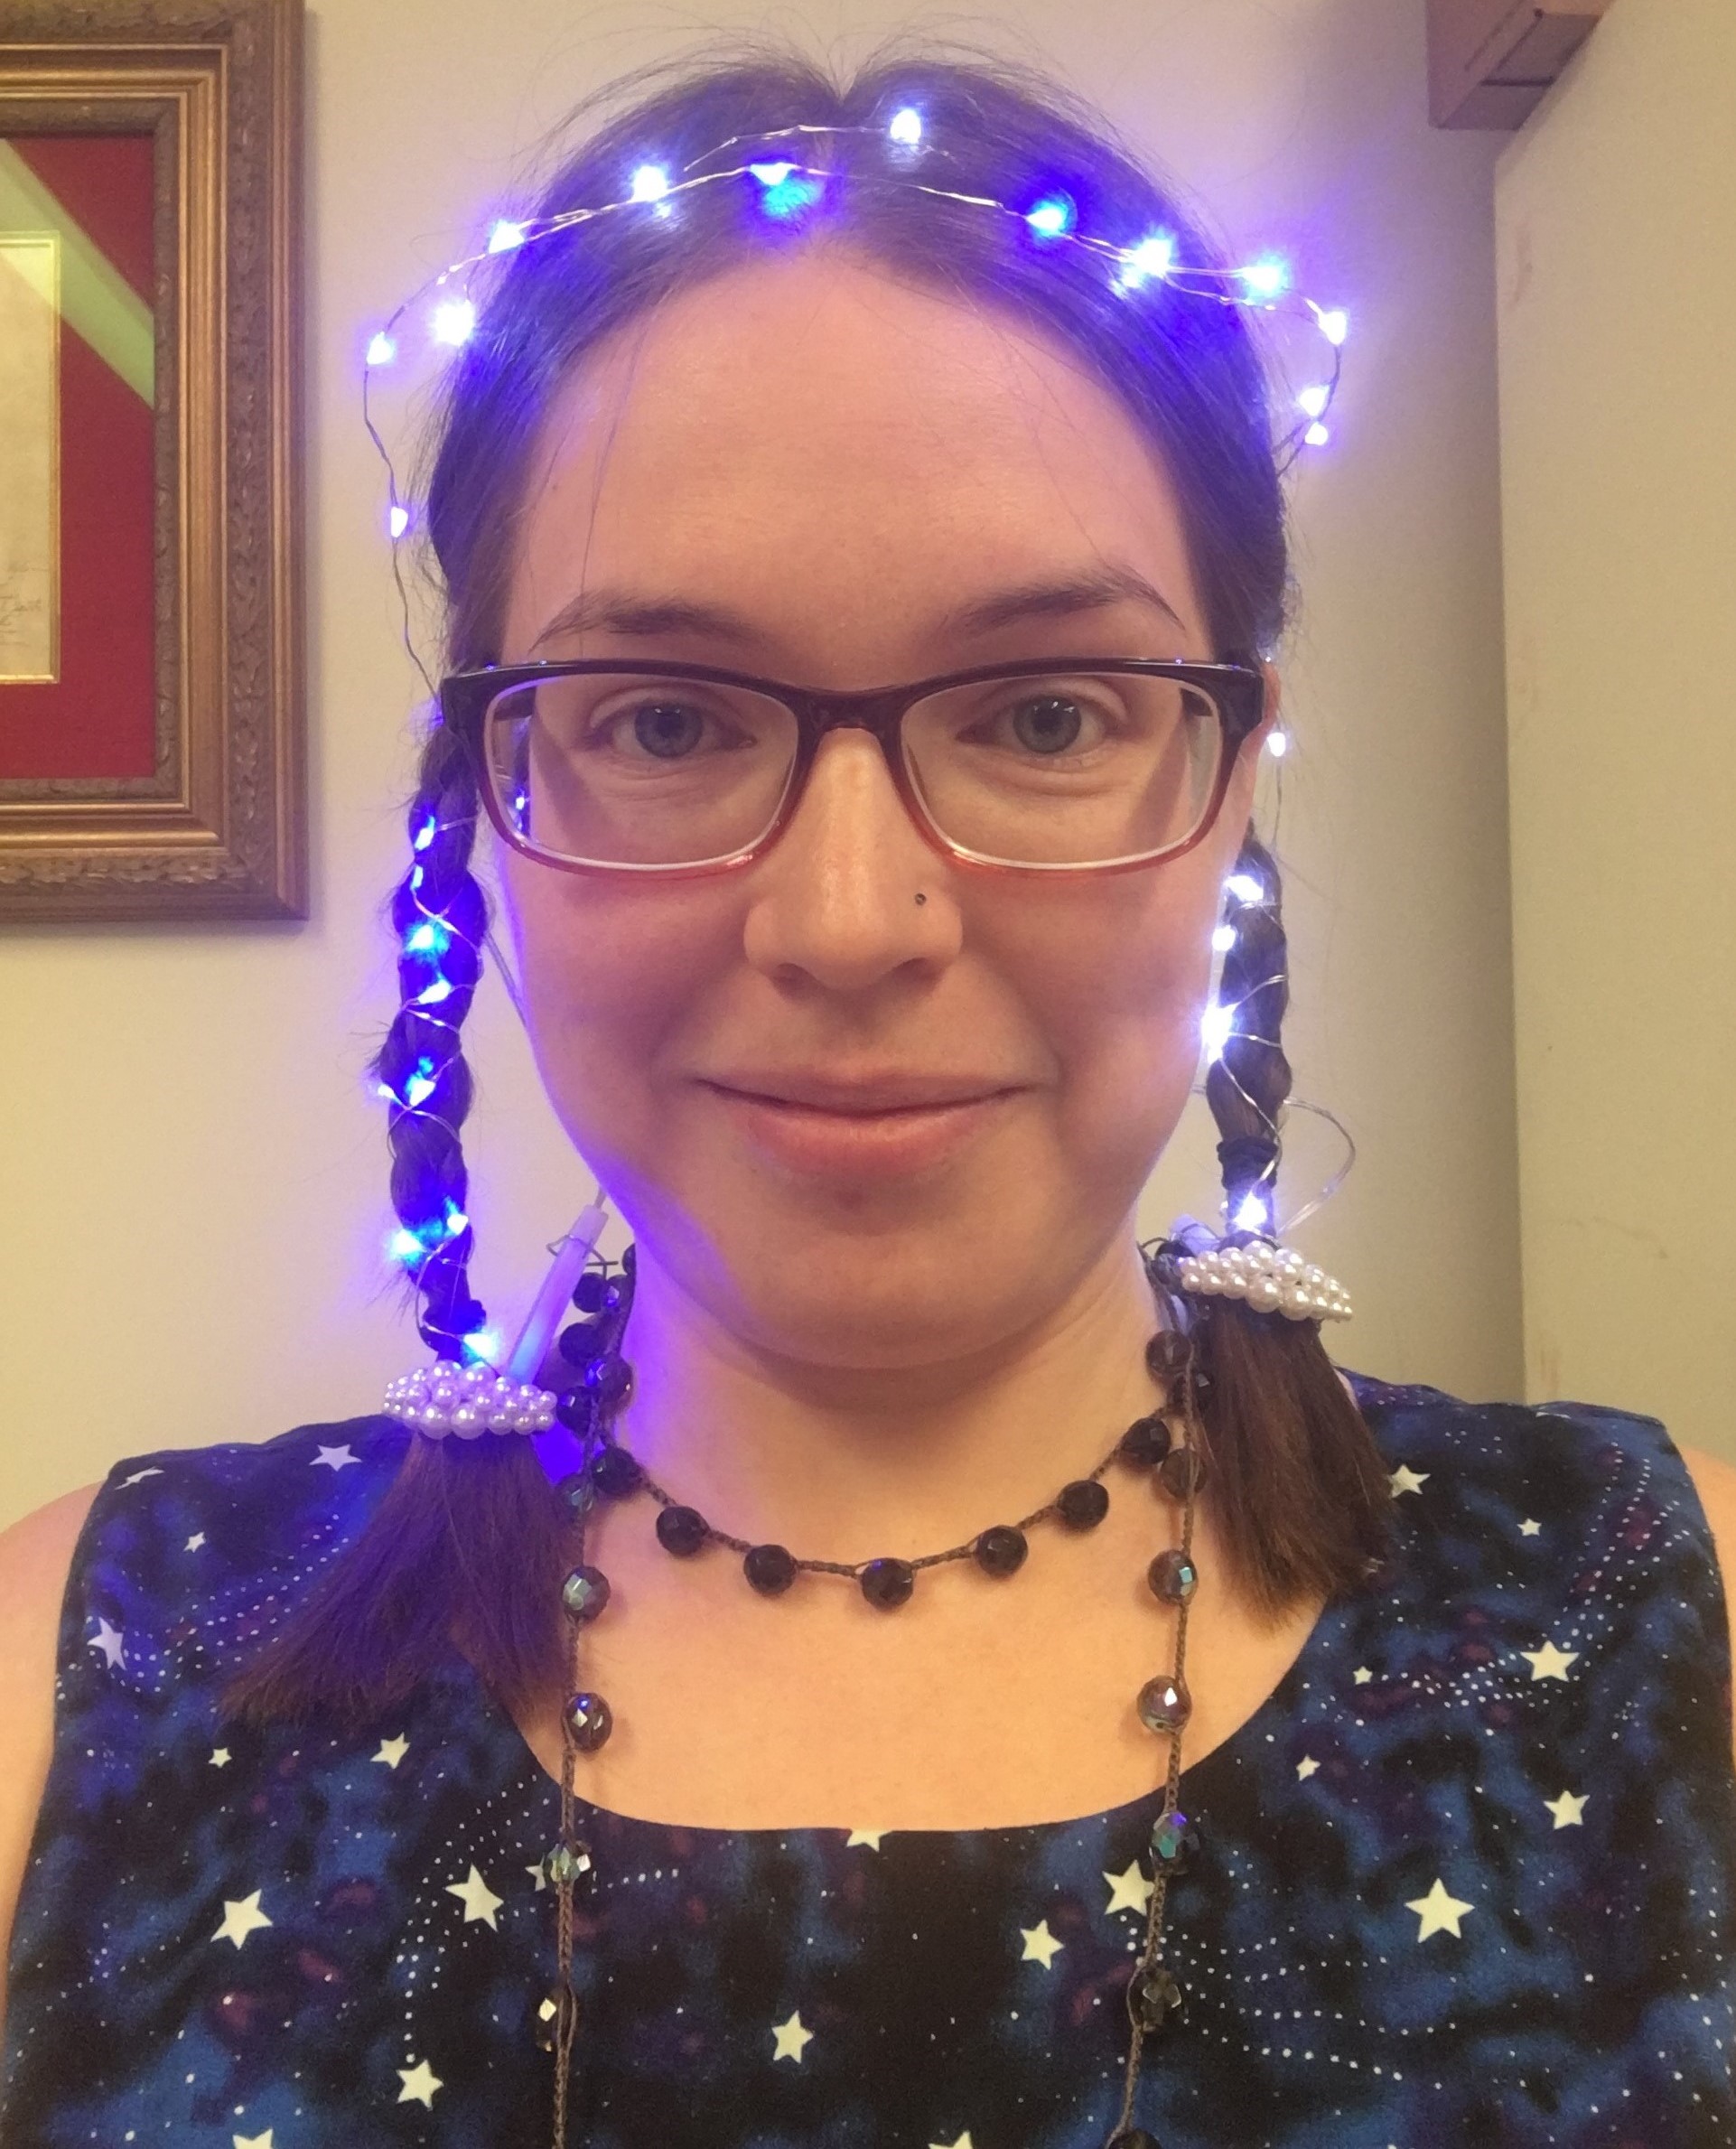 A woman with wearing glasses and brown, shoulder-length hair with two braids and fairy lights woven around her head and braids. She is wearing a dark blue shirt with pale yellow stars.  